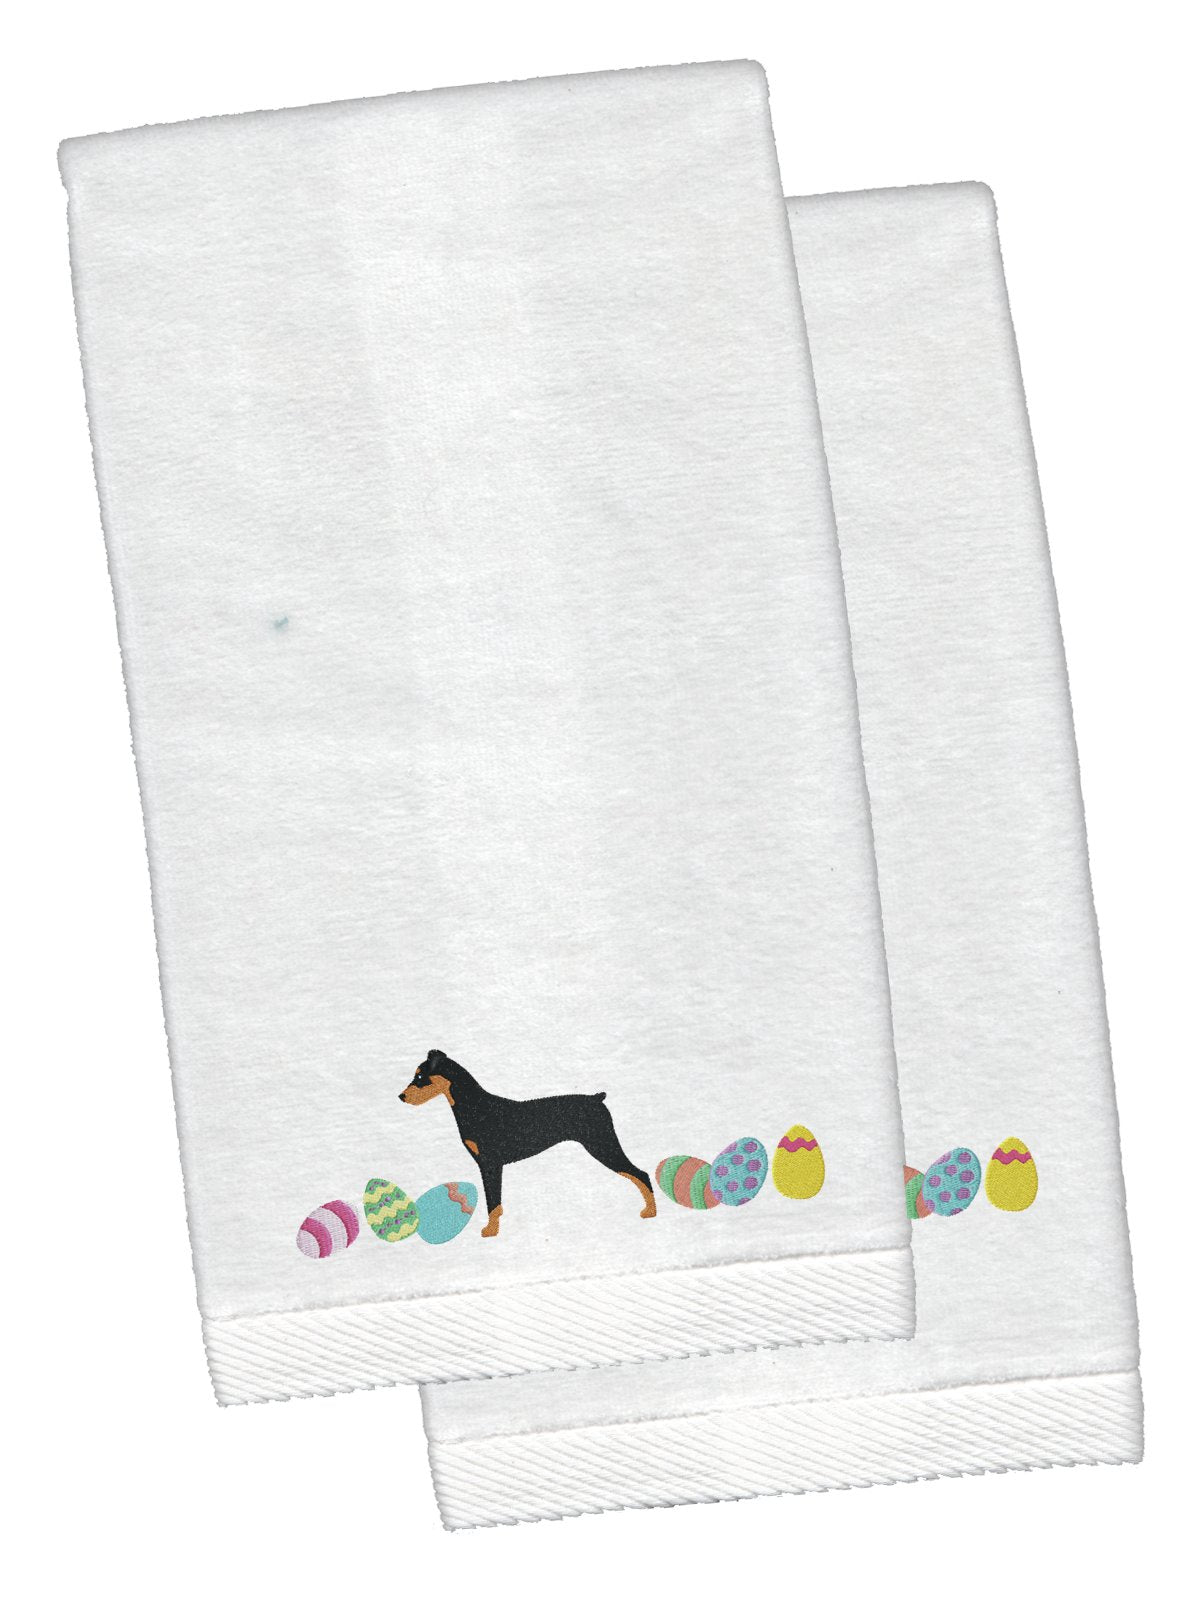 German Pinscher Easter White Embroidered Plush Hand Towel Set of 2 CK1643KTEMB by Caroline's Treasures